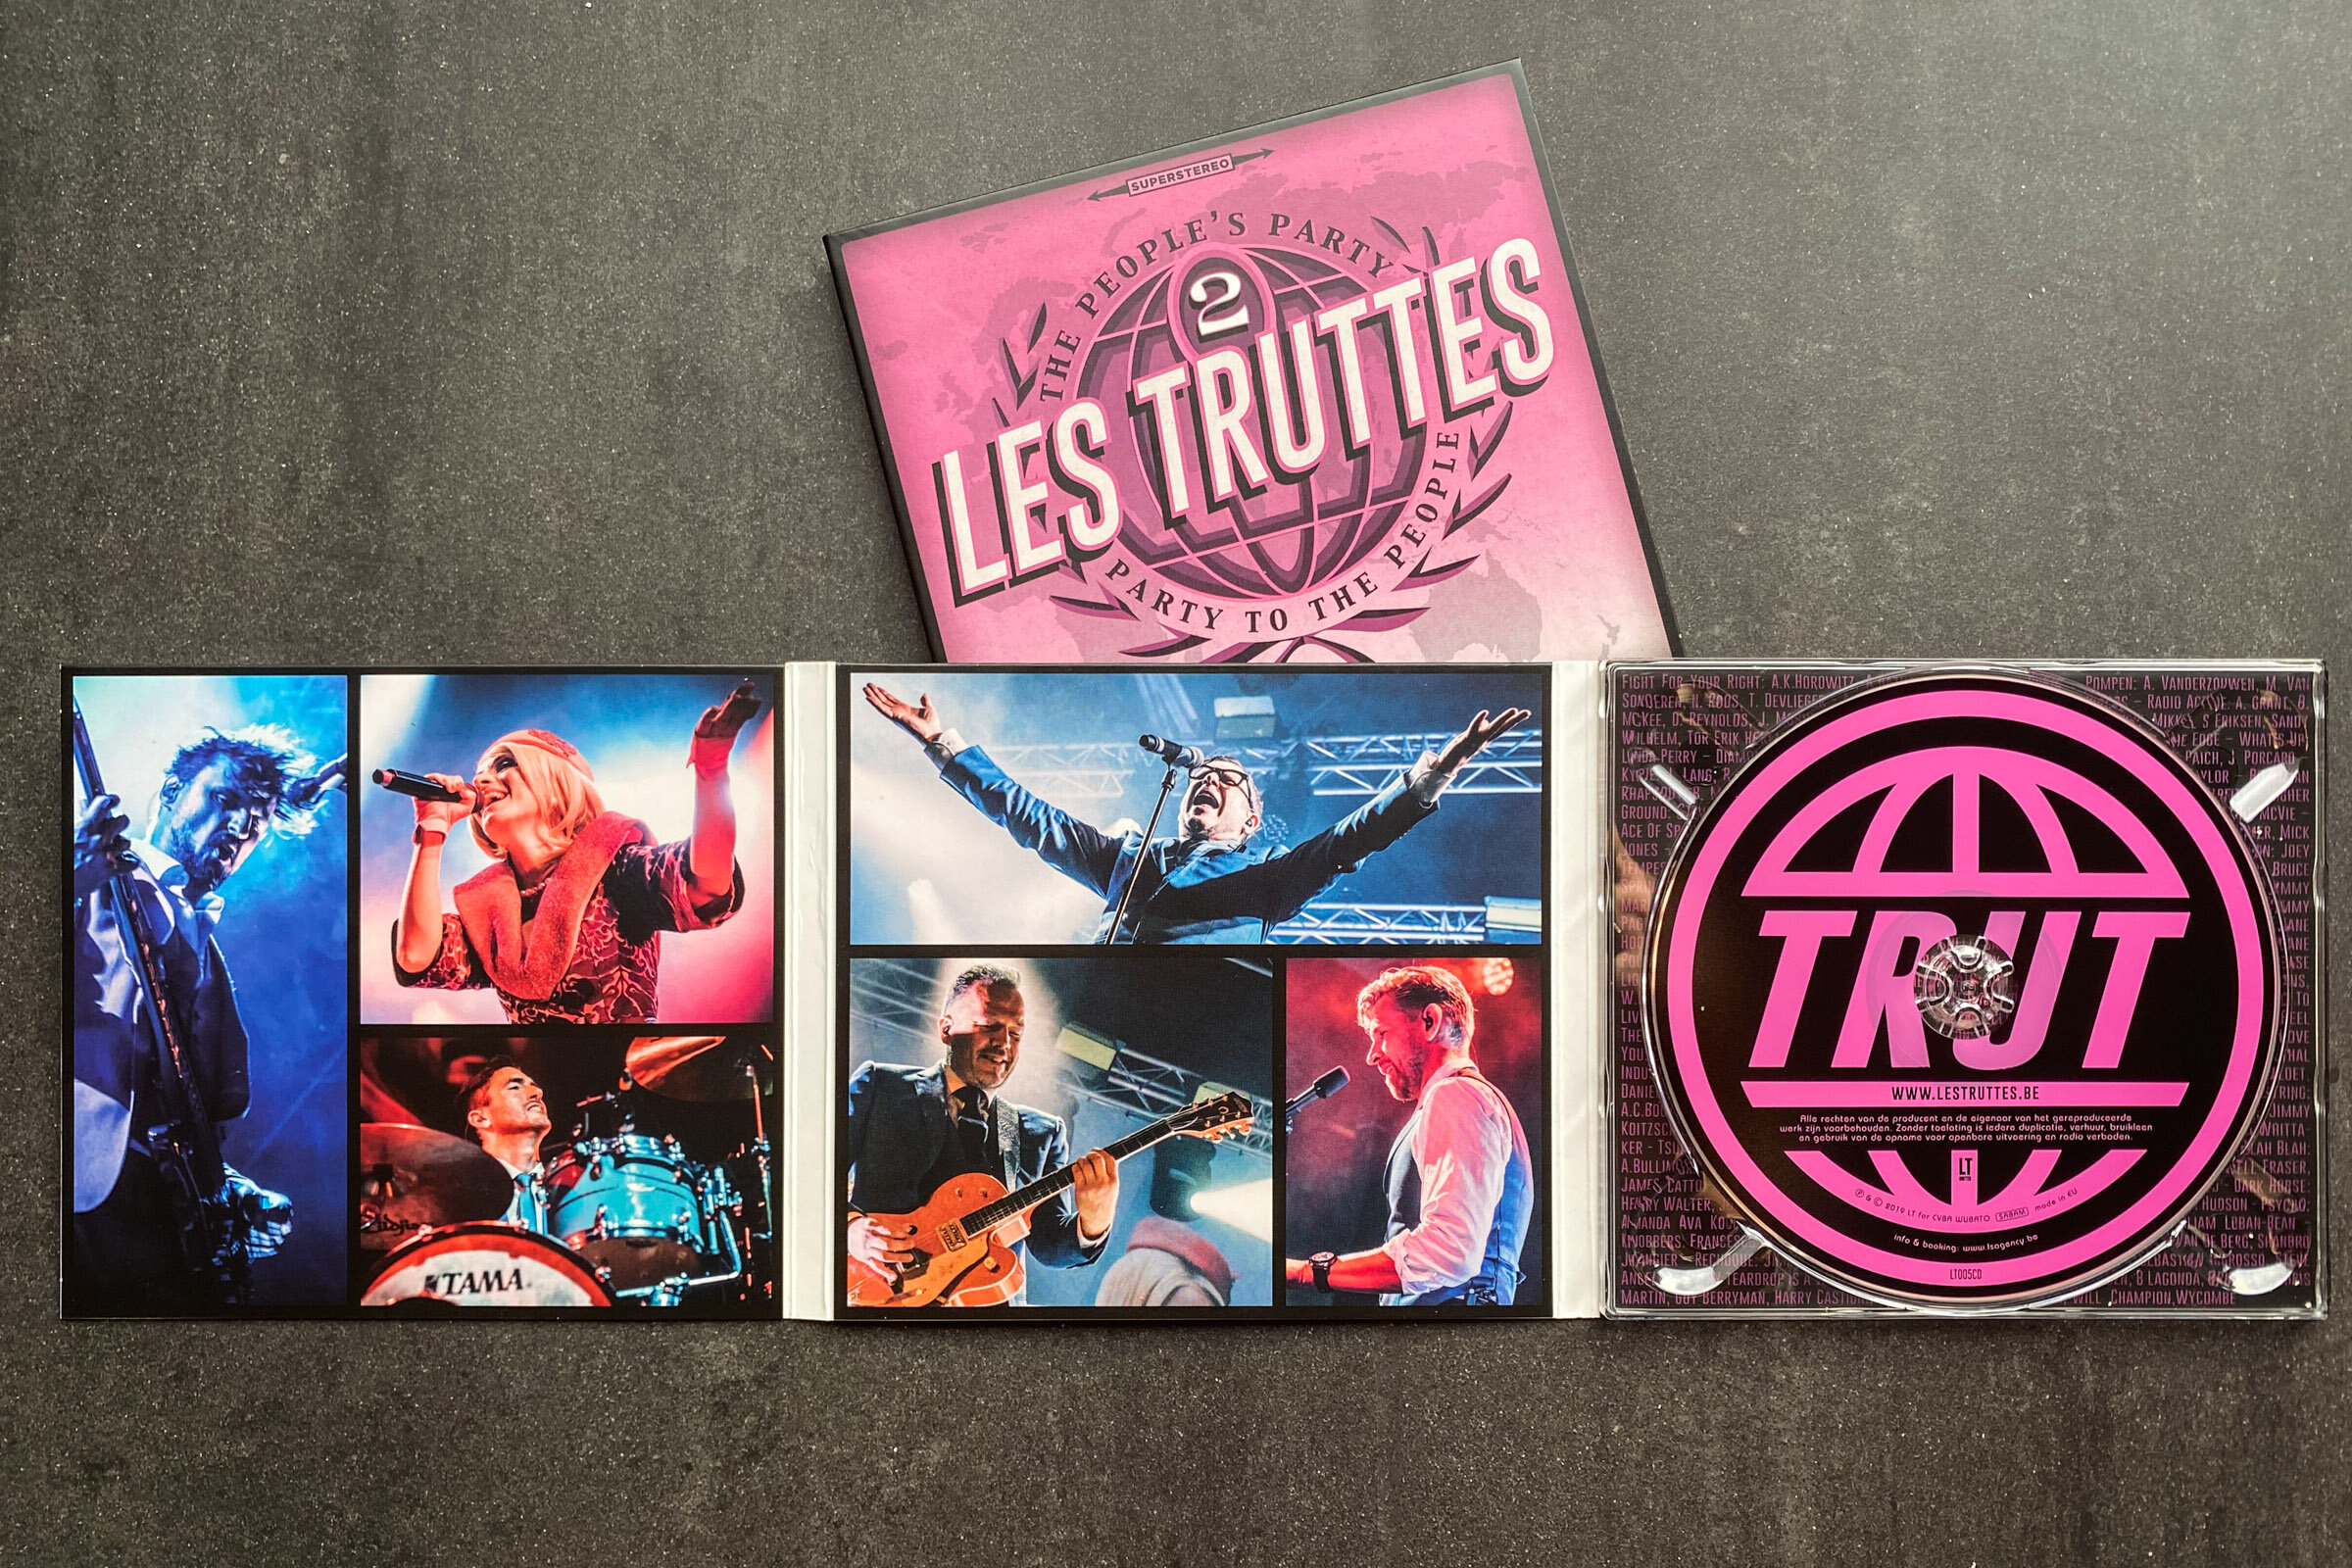 Les Truttes - Party to the People II